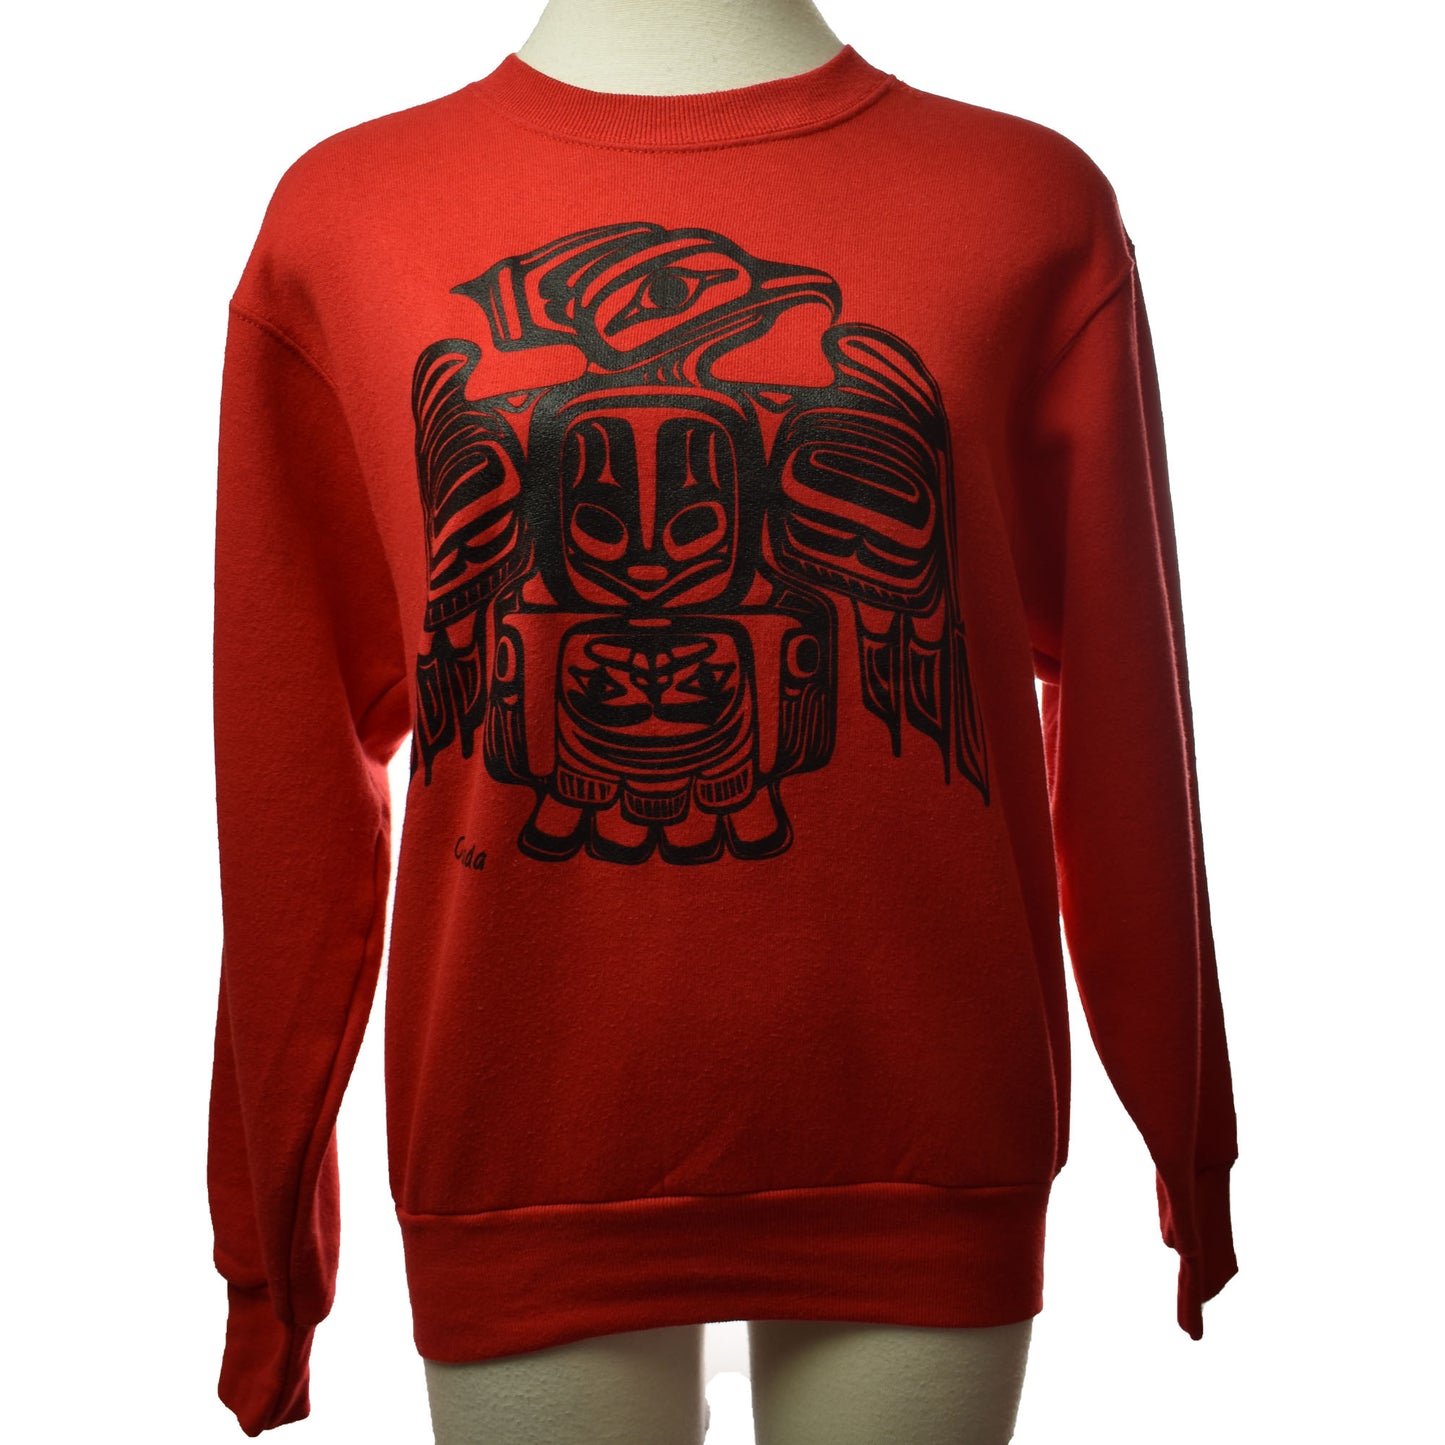 Vintage 80s Indigenous Art Sweatshirt - Size Small Made in Canada Crewneck